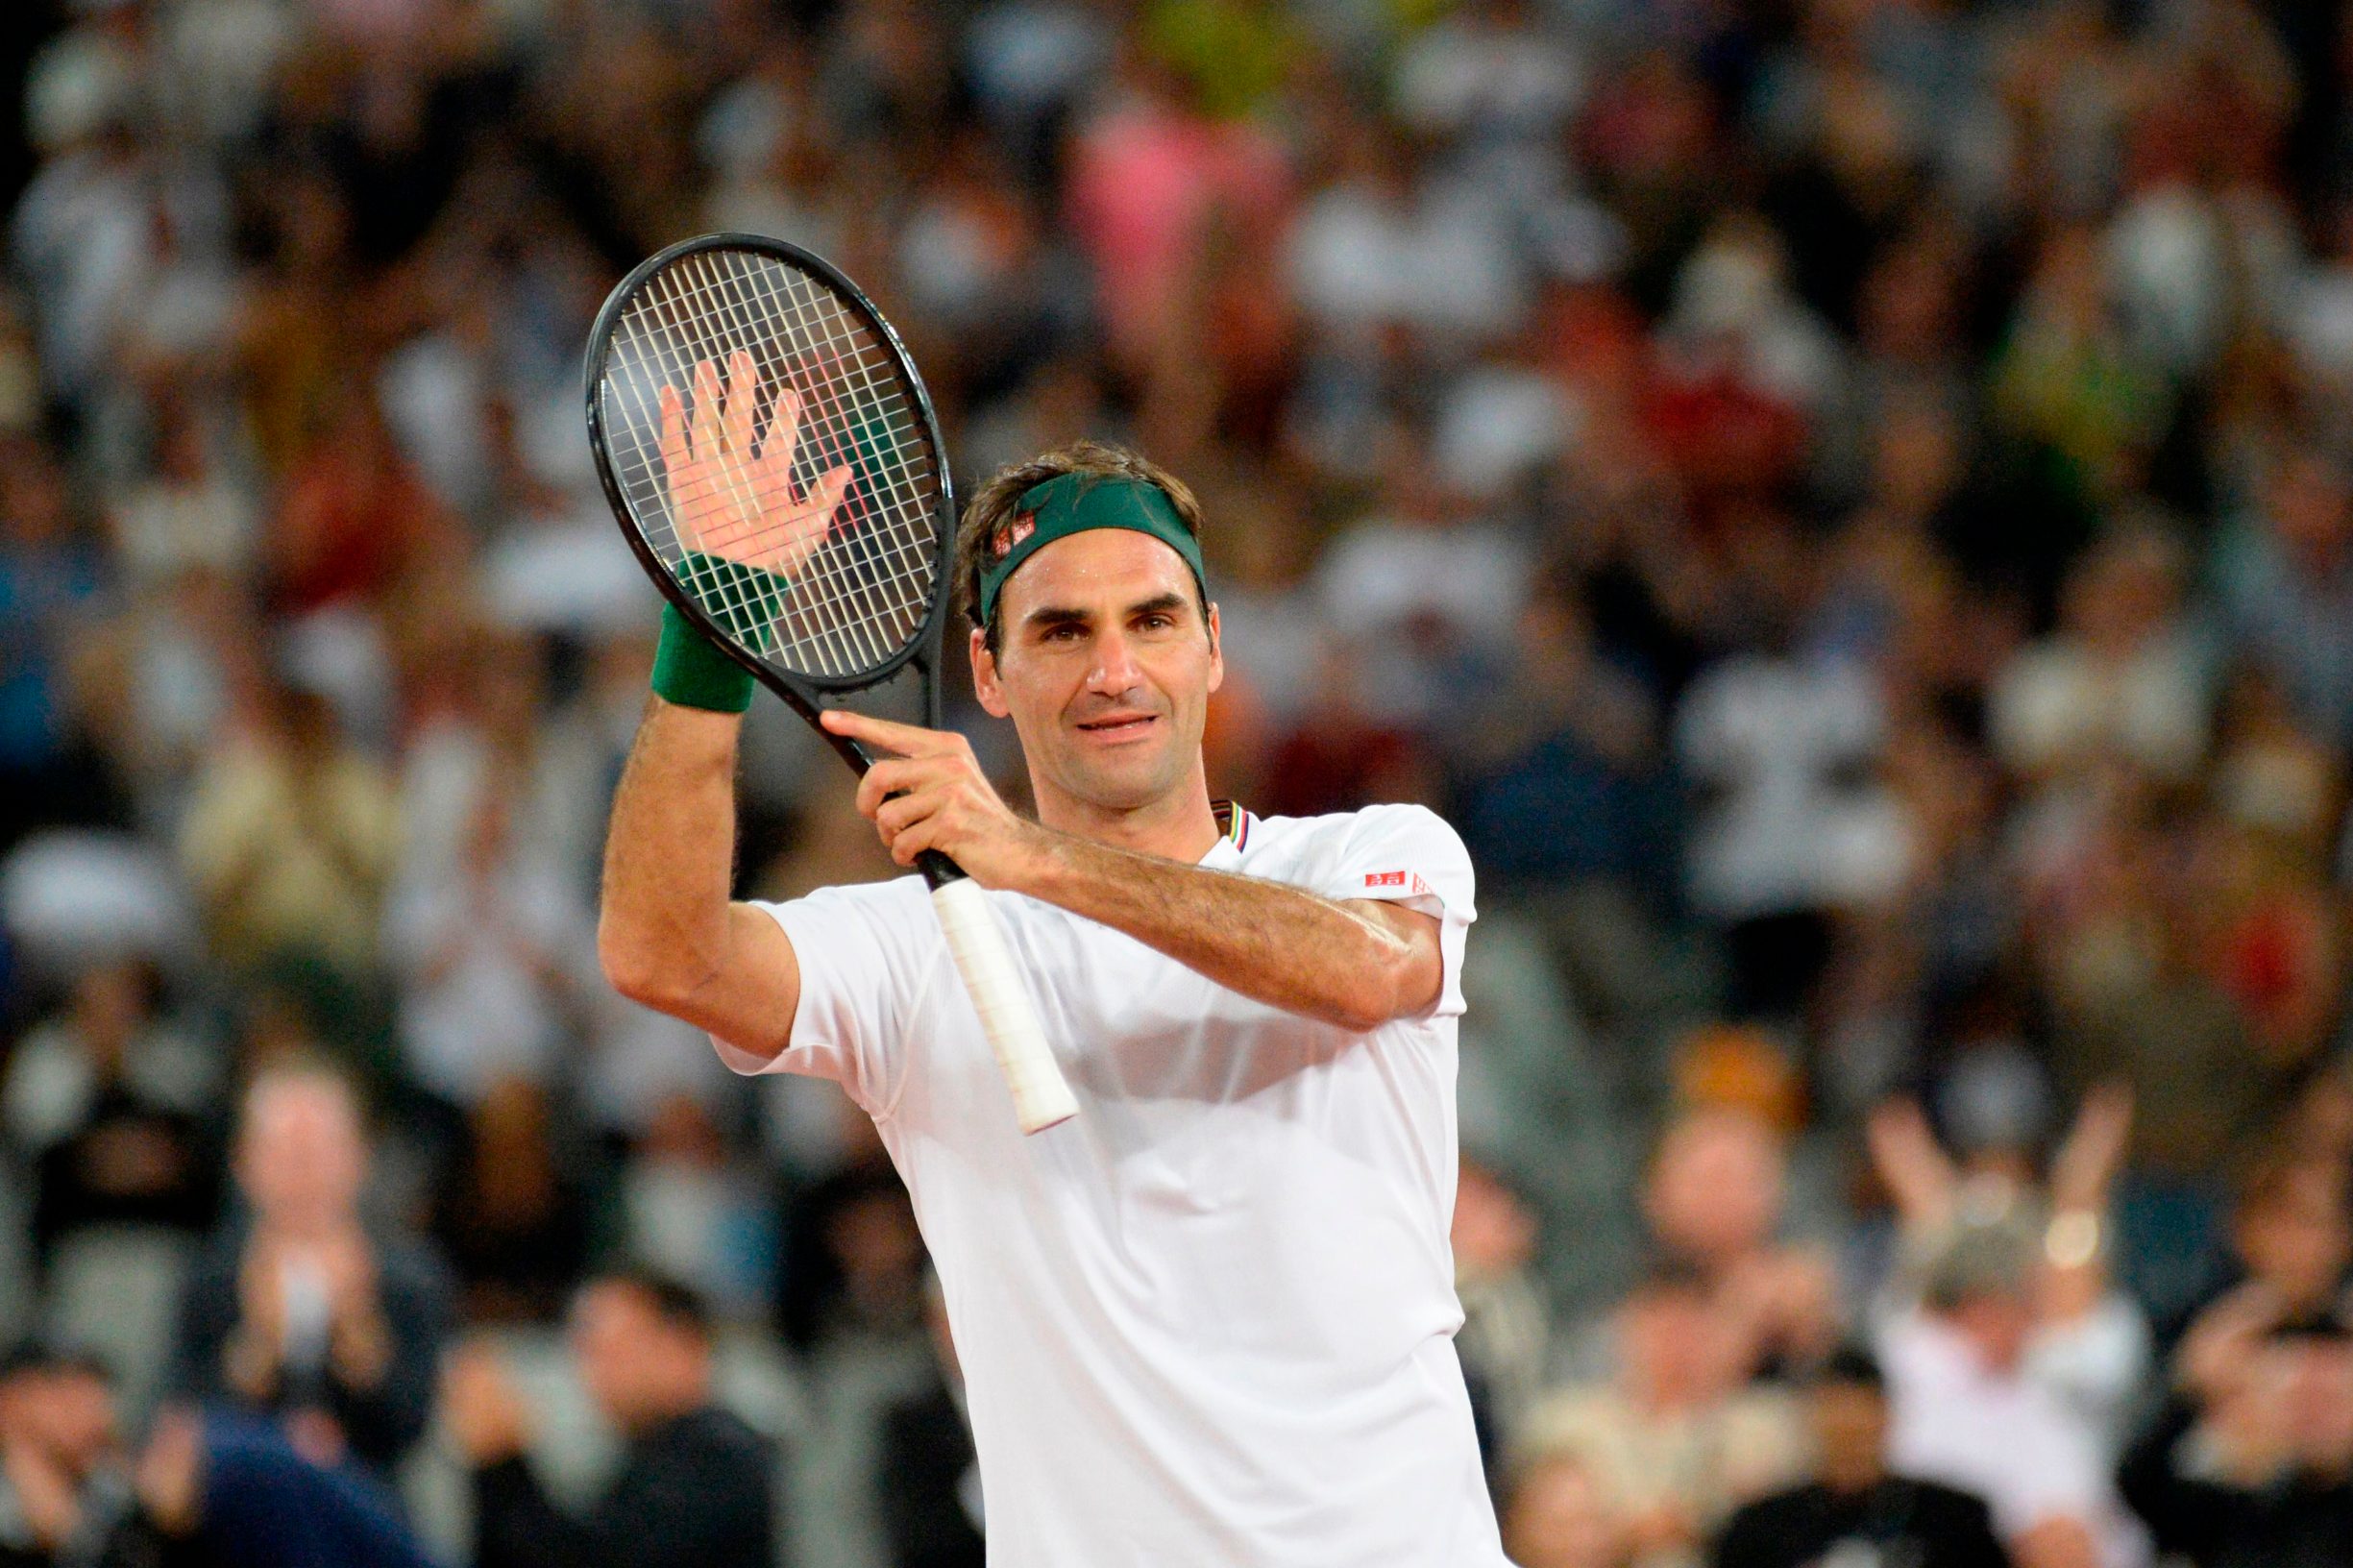 Switzerland's Roger Federer reacts after his victory against Spain's Rafael Nadal during their tennis match at The Match in Africa at the Cape Town Stadium, in Cape Town on February 7, 2020. (Photo by RODGER BOSCH / AFP)